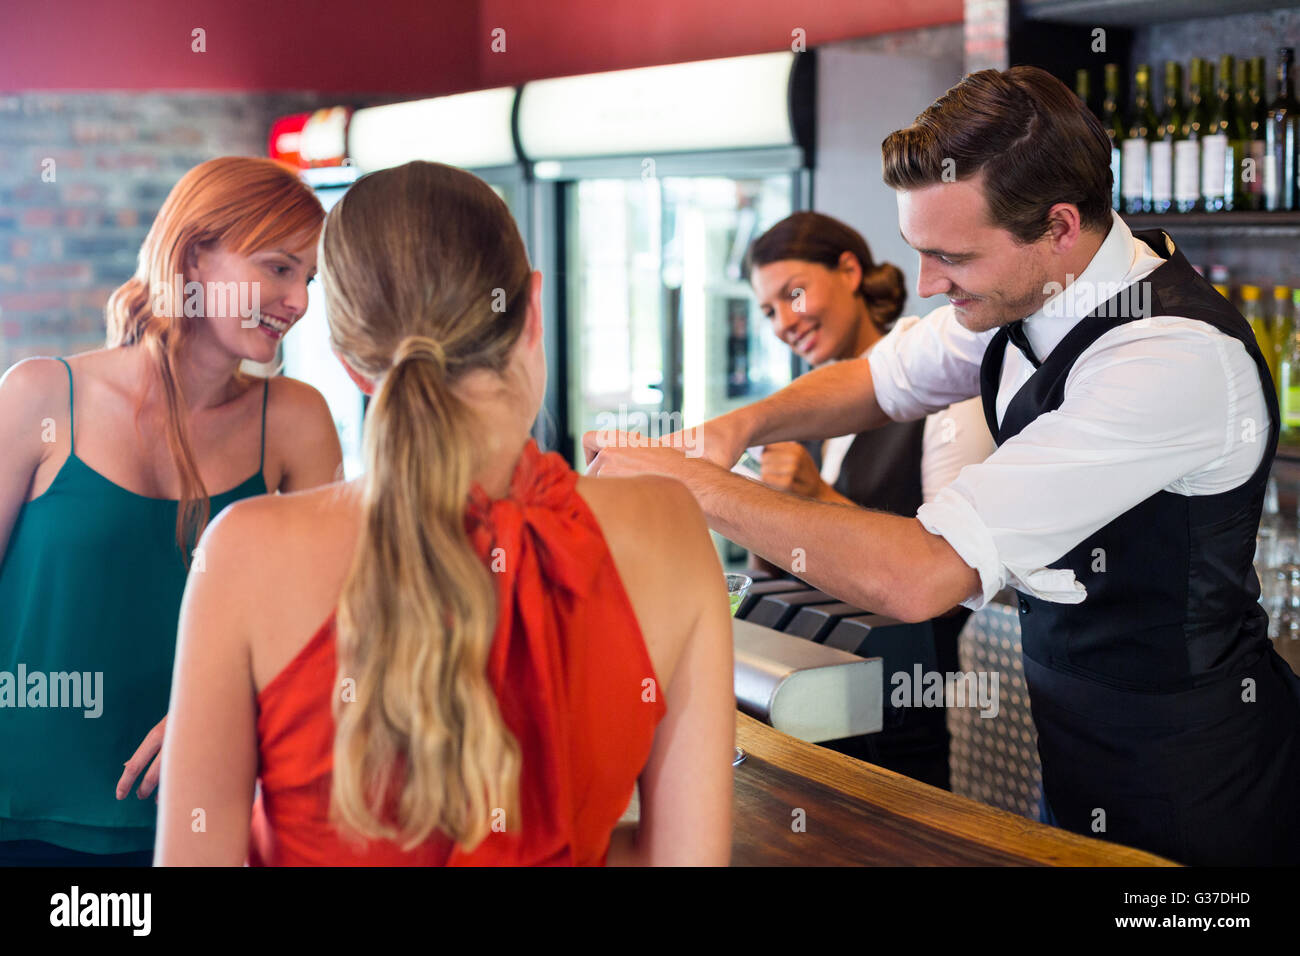 Friends standing at counter while bartender preparing a drink Stock Photo